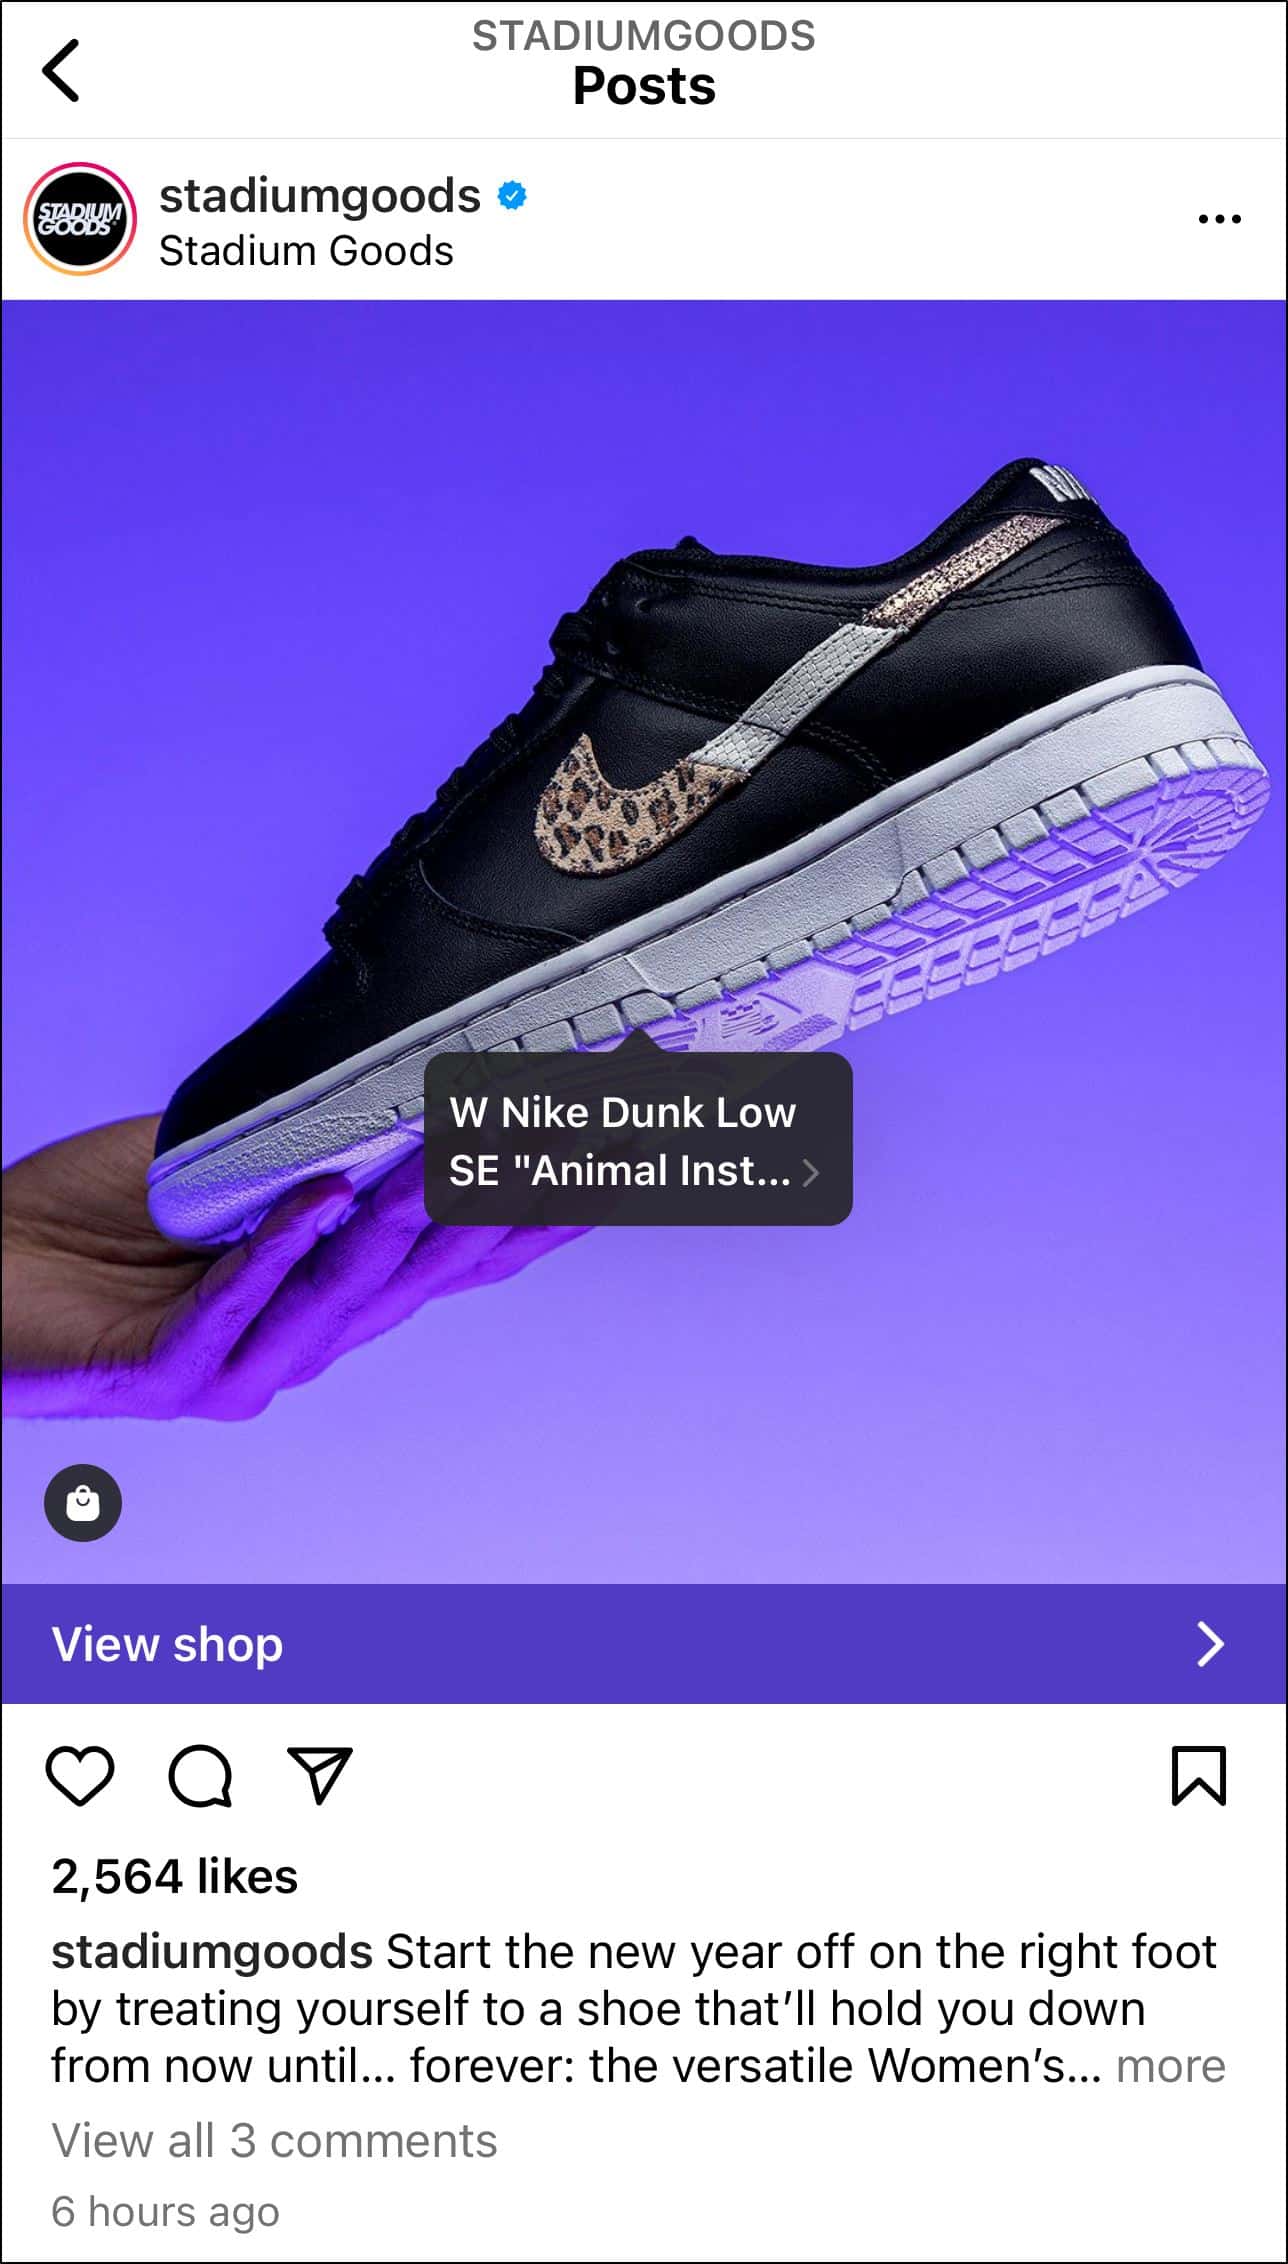 Instagram product tags in posts